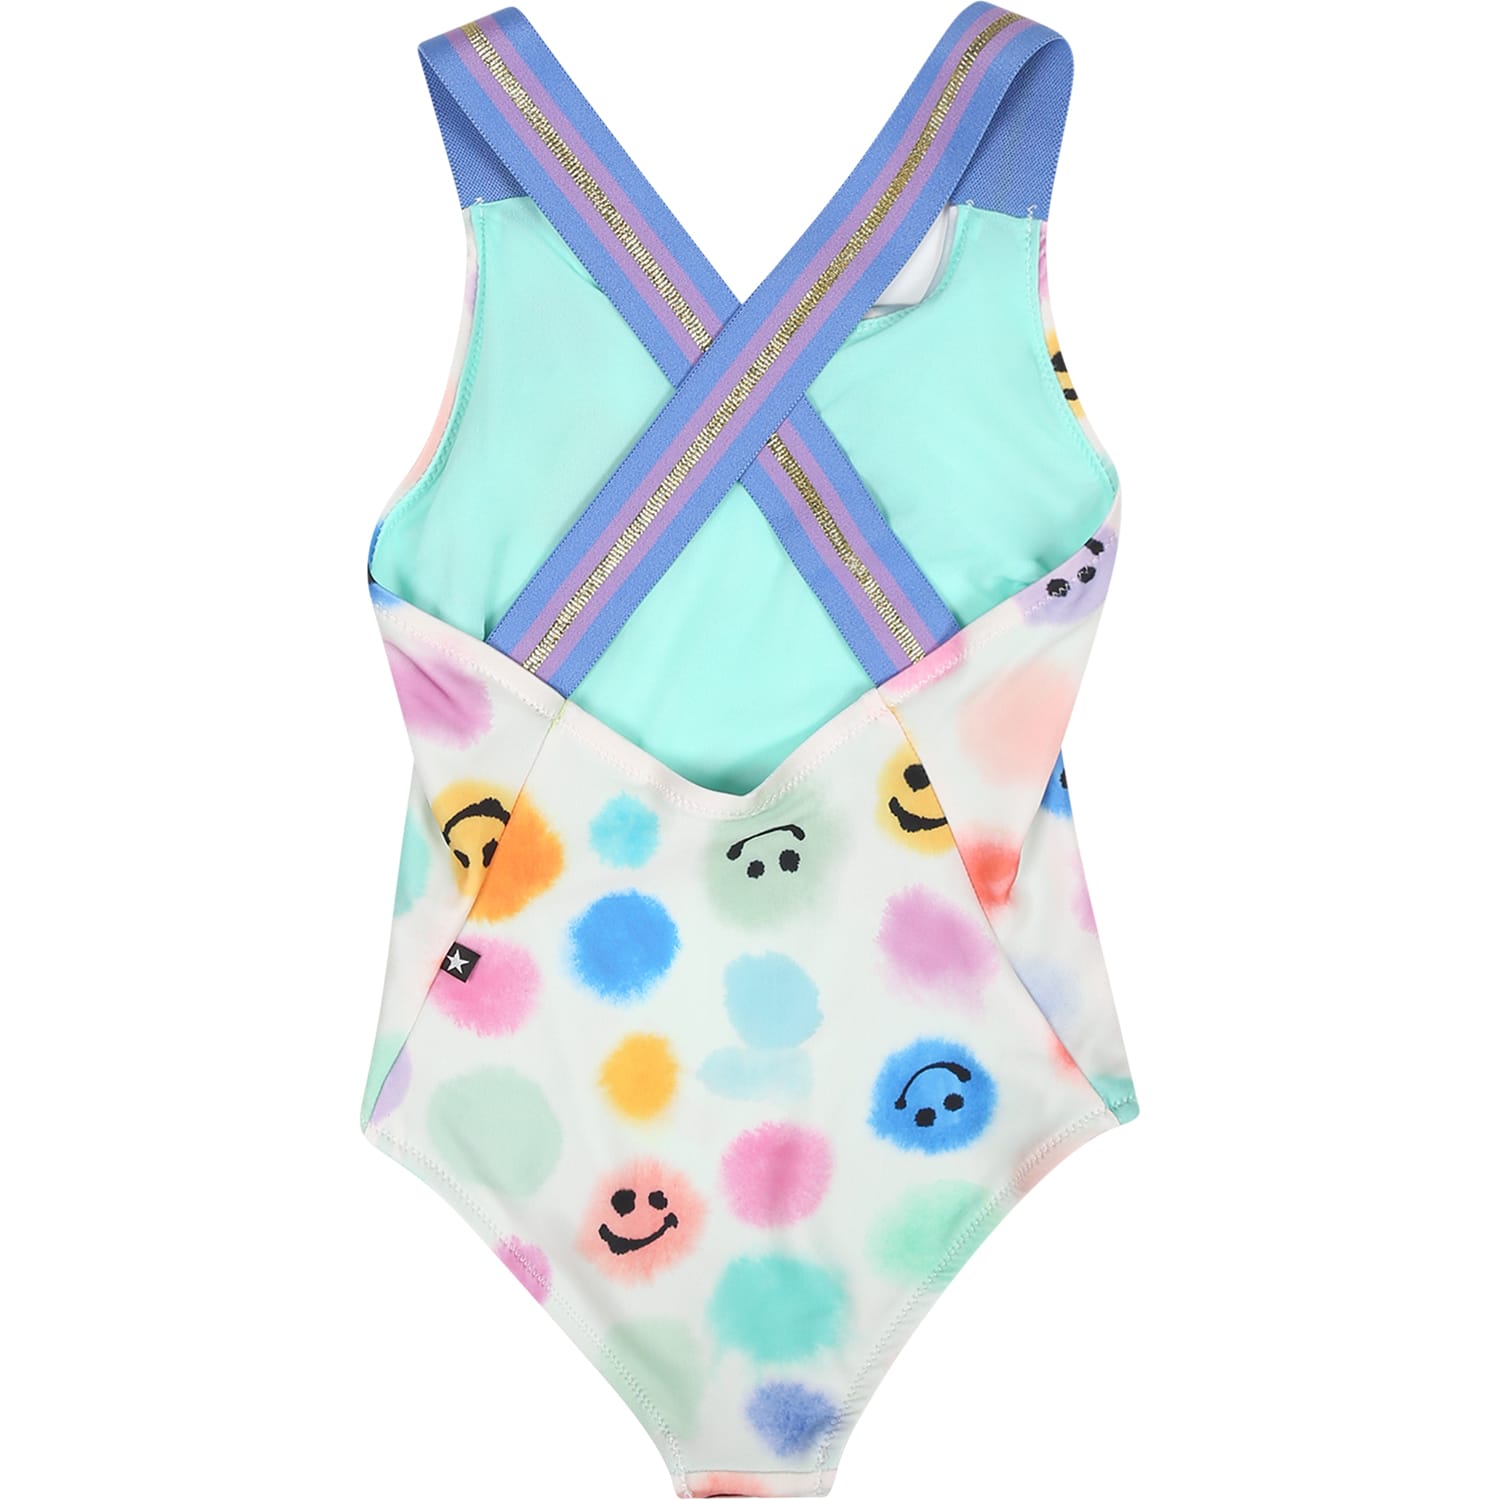 Shop Molo White Swimsuit For Baby Girl With Polka Dots And Smiley In Multicolor